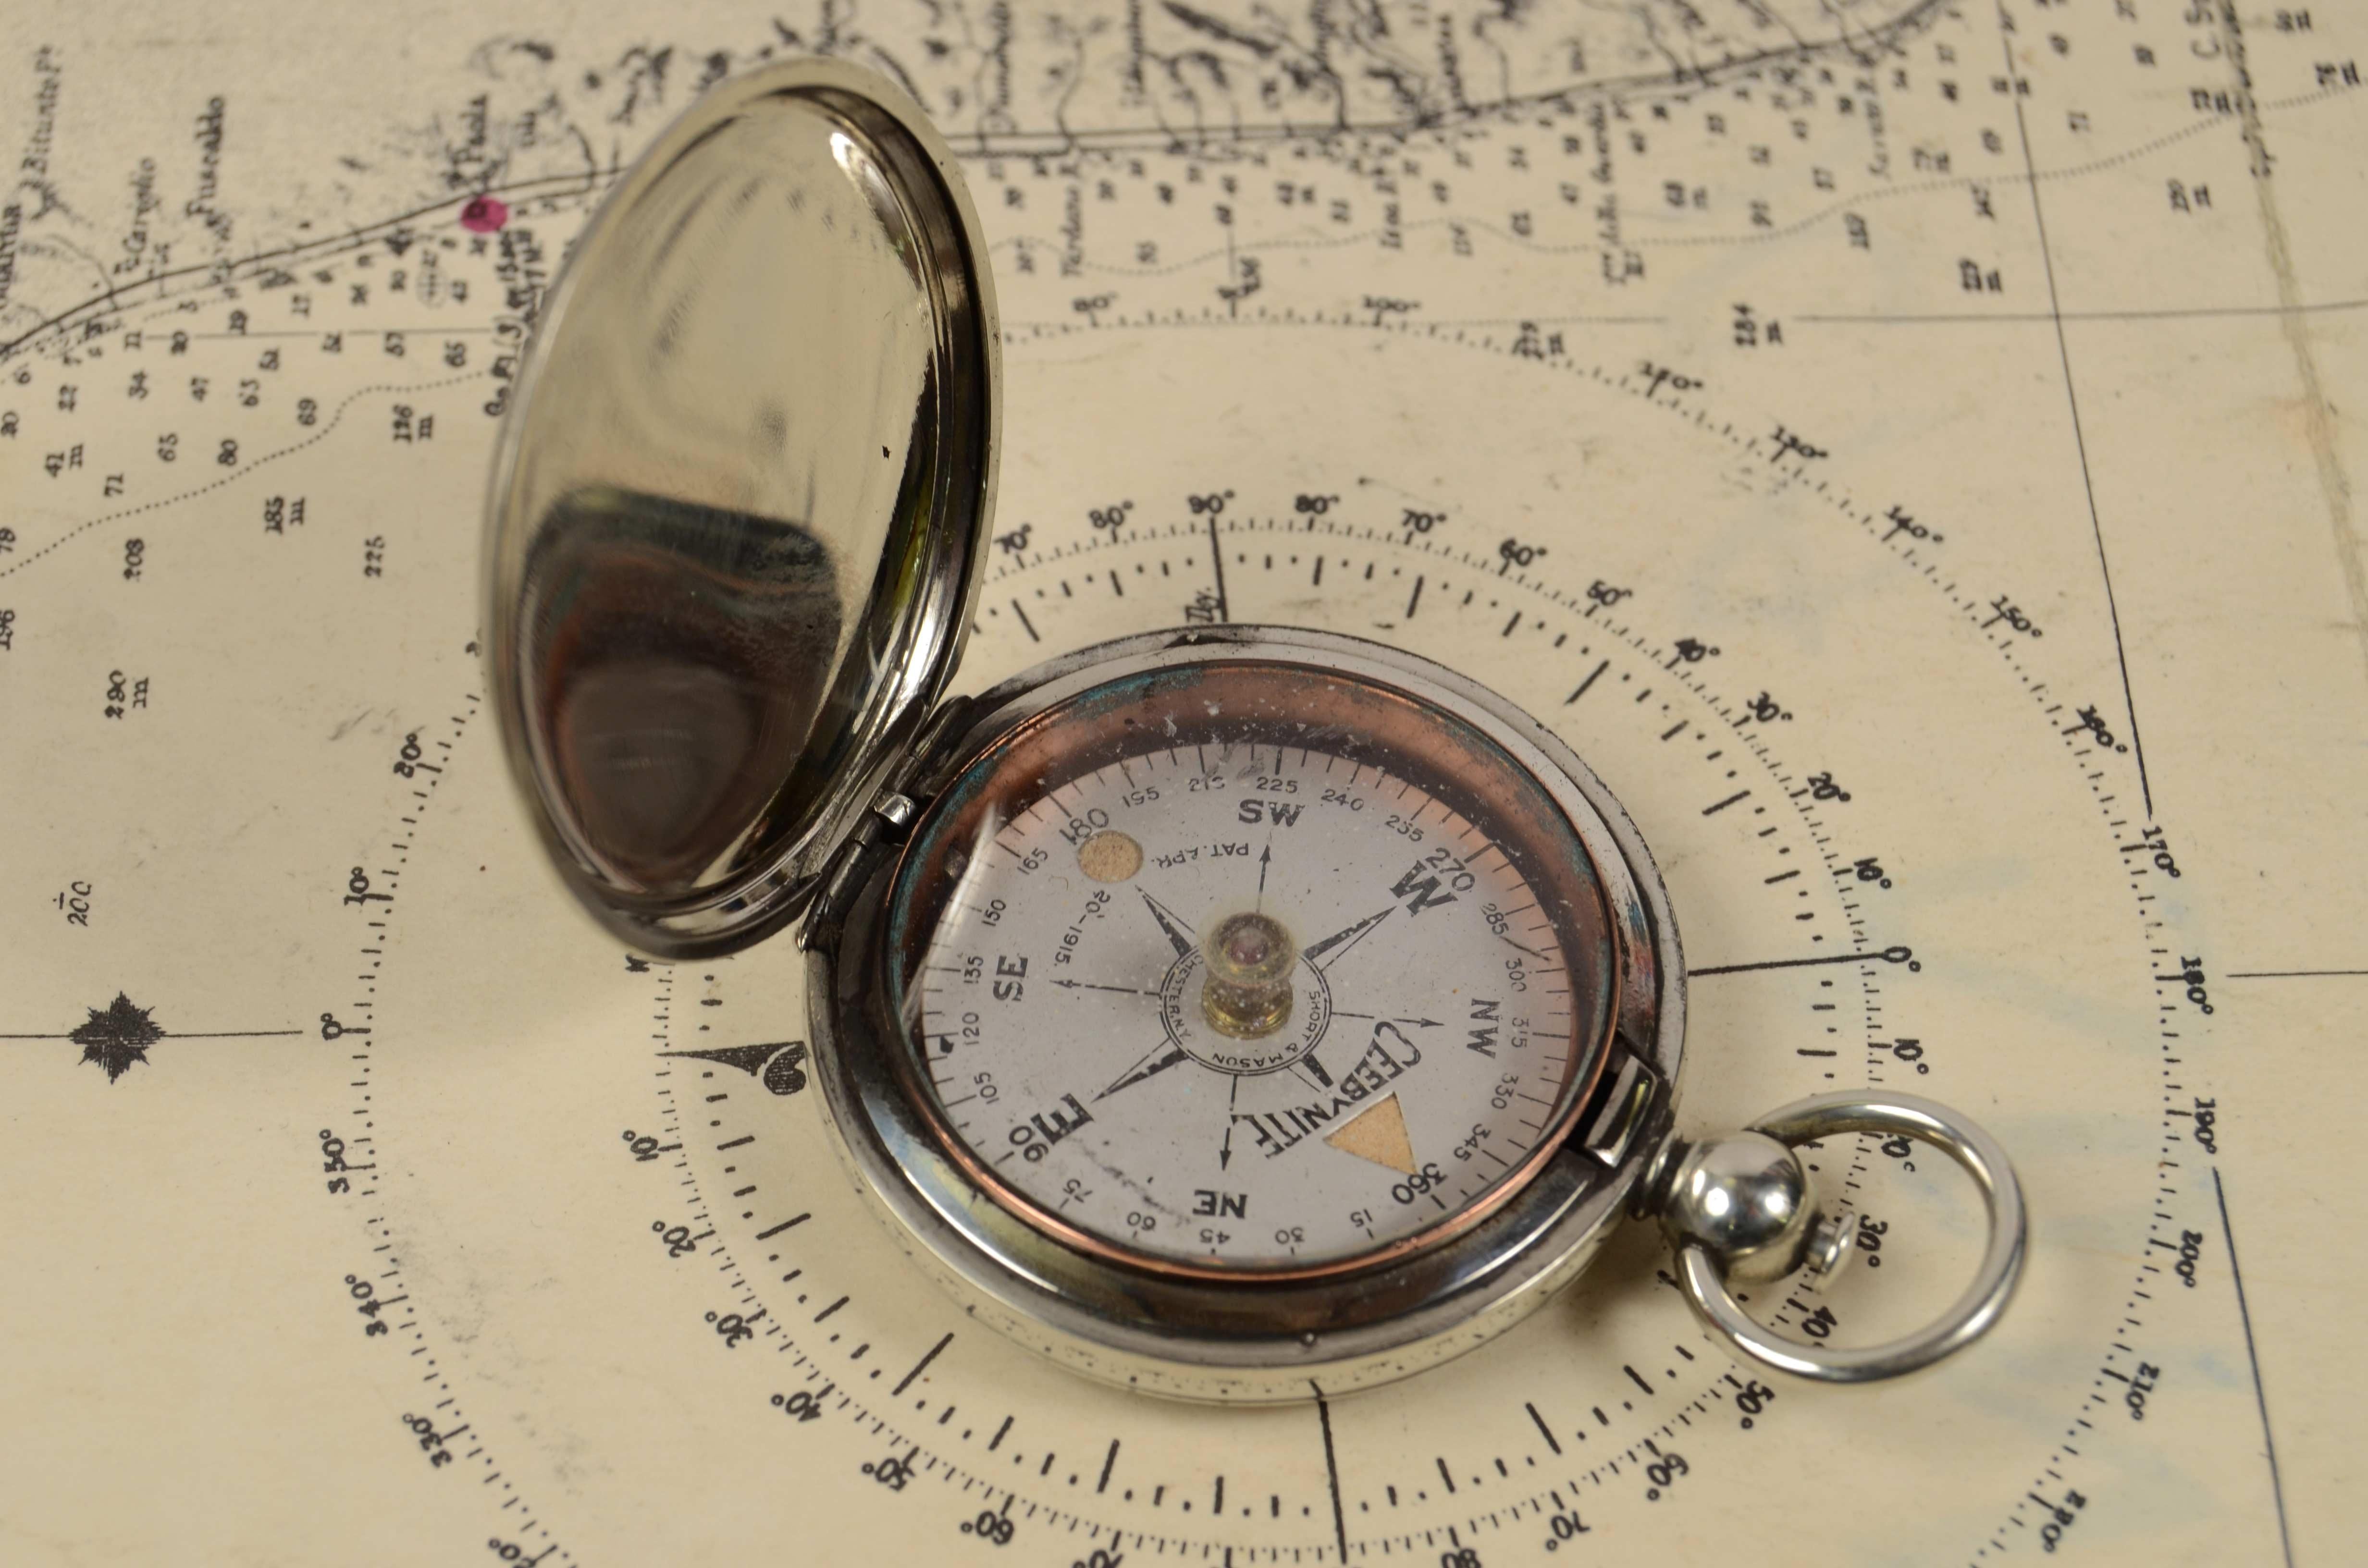 Pocket compass used by American aviation officers from 1915 of brass in the shape of a pocket watch, signed Ceebynite Short & Mason Taylor Rochester N.Y. The compass is equipped with a lid with snap closure with release button inside the ring.